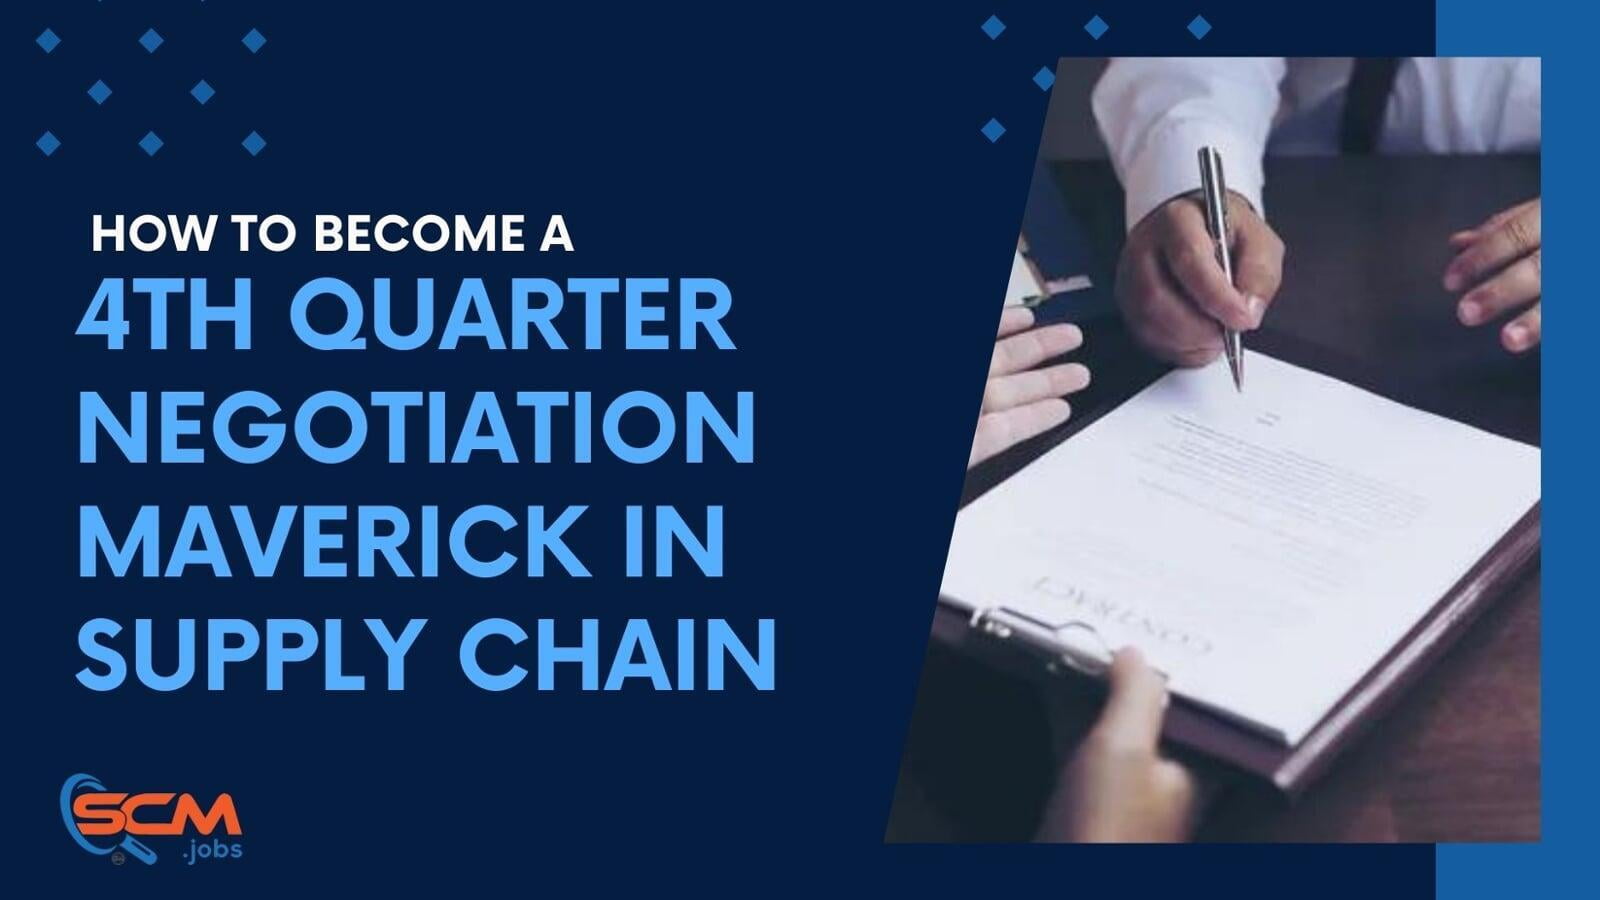 How to Become a 4th Quarter Negotiation Maverick in Supply Chain